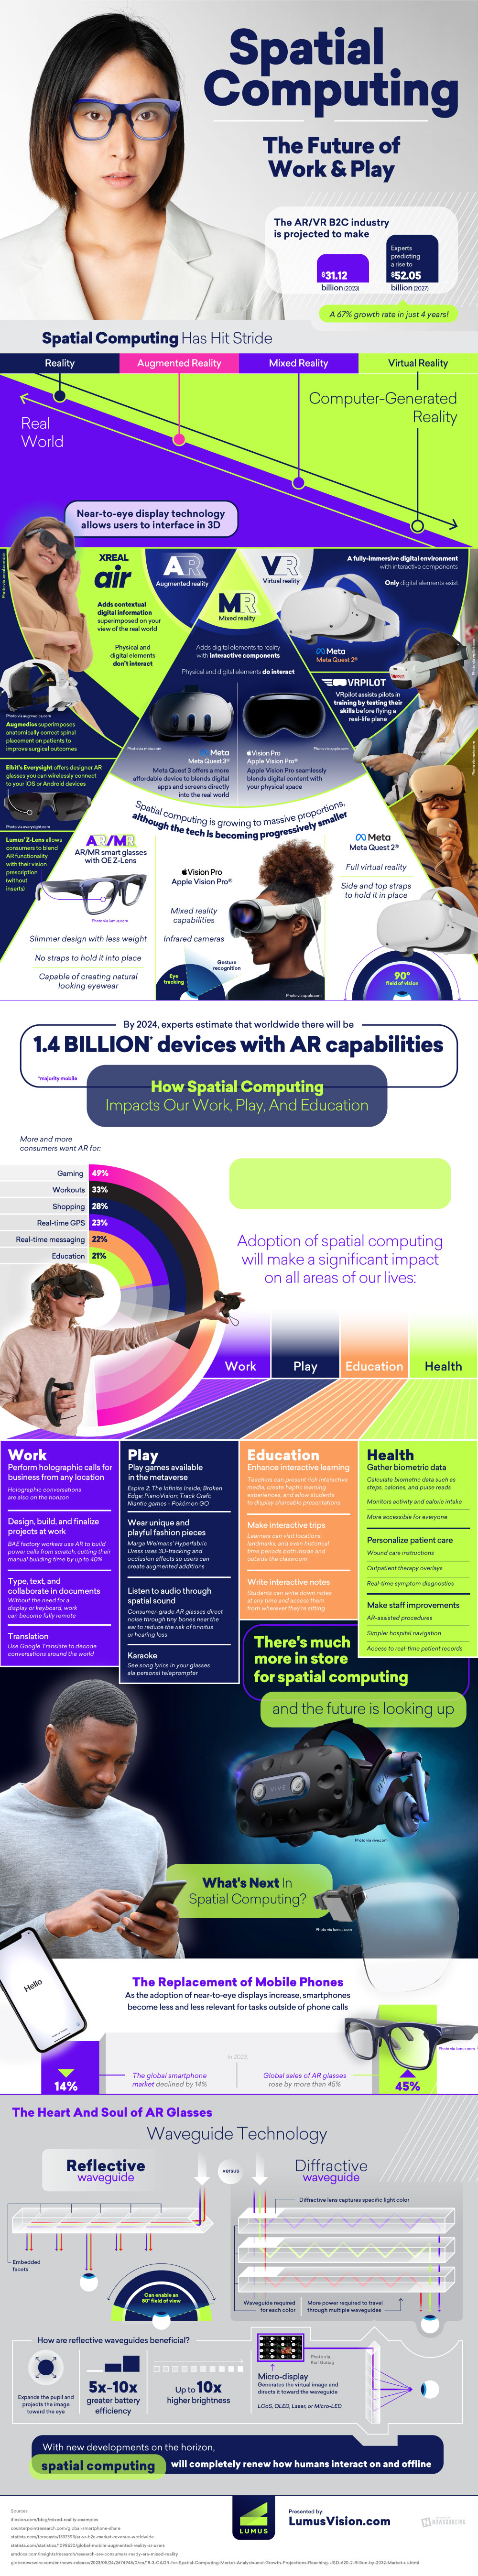 Spatial Computing: The Future of Work and Play